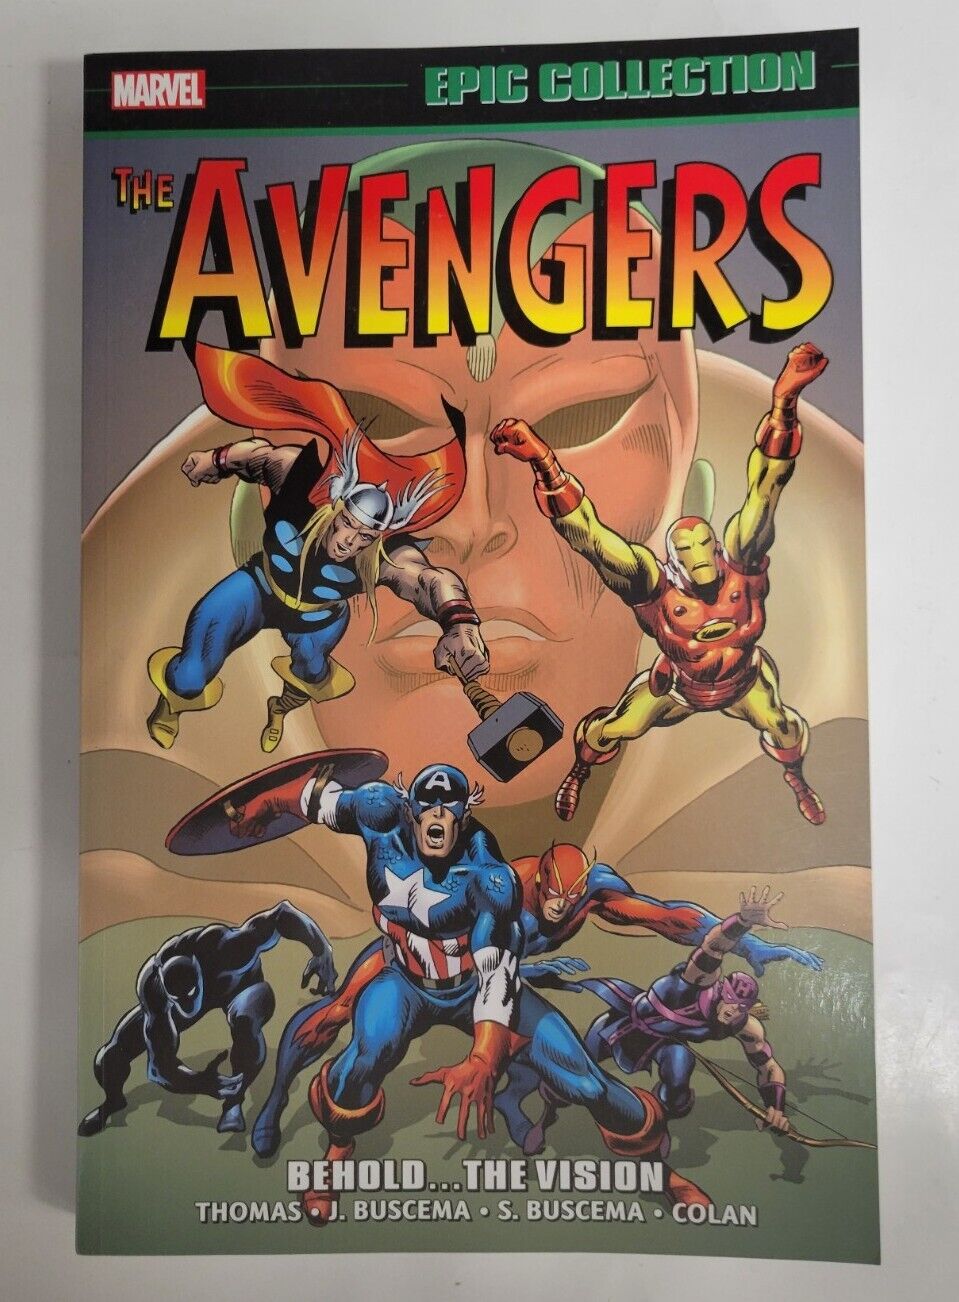 Epic Collection Avengers - BEHOLD... THE VISION VOL 4 - Graphic Novel TPB